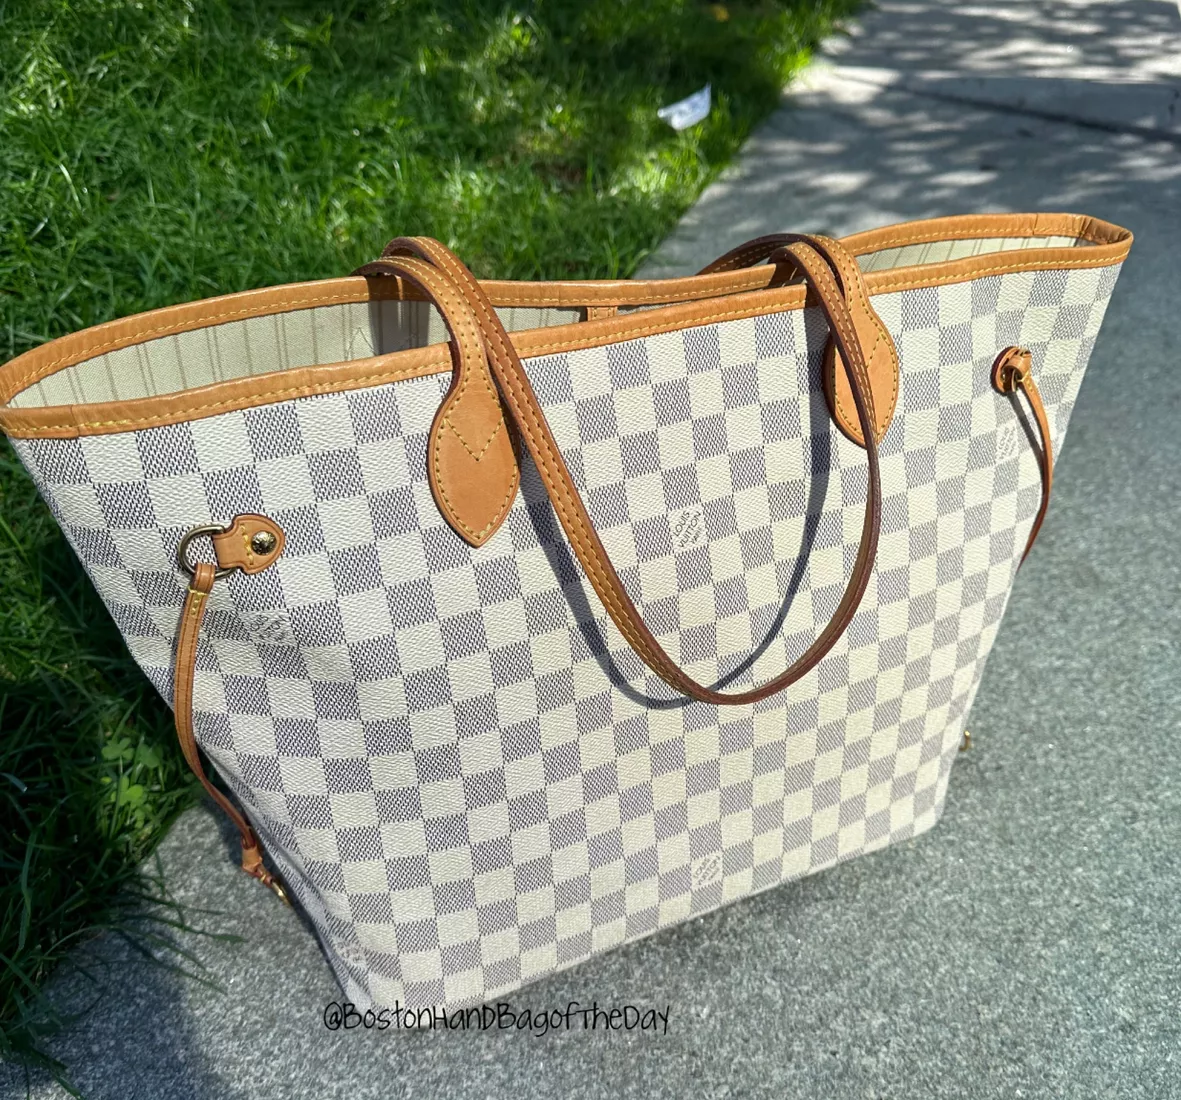 LV DAMIER AZUR NEVERFULL MM 2-YEAR UPDATED REVIEW: WIMB, WEAR & TEAR, PROS  & CONS, IS IT WORTH IT? 